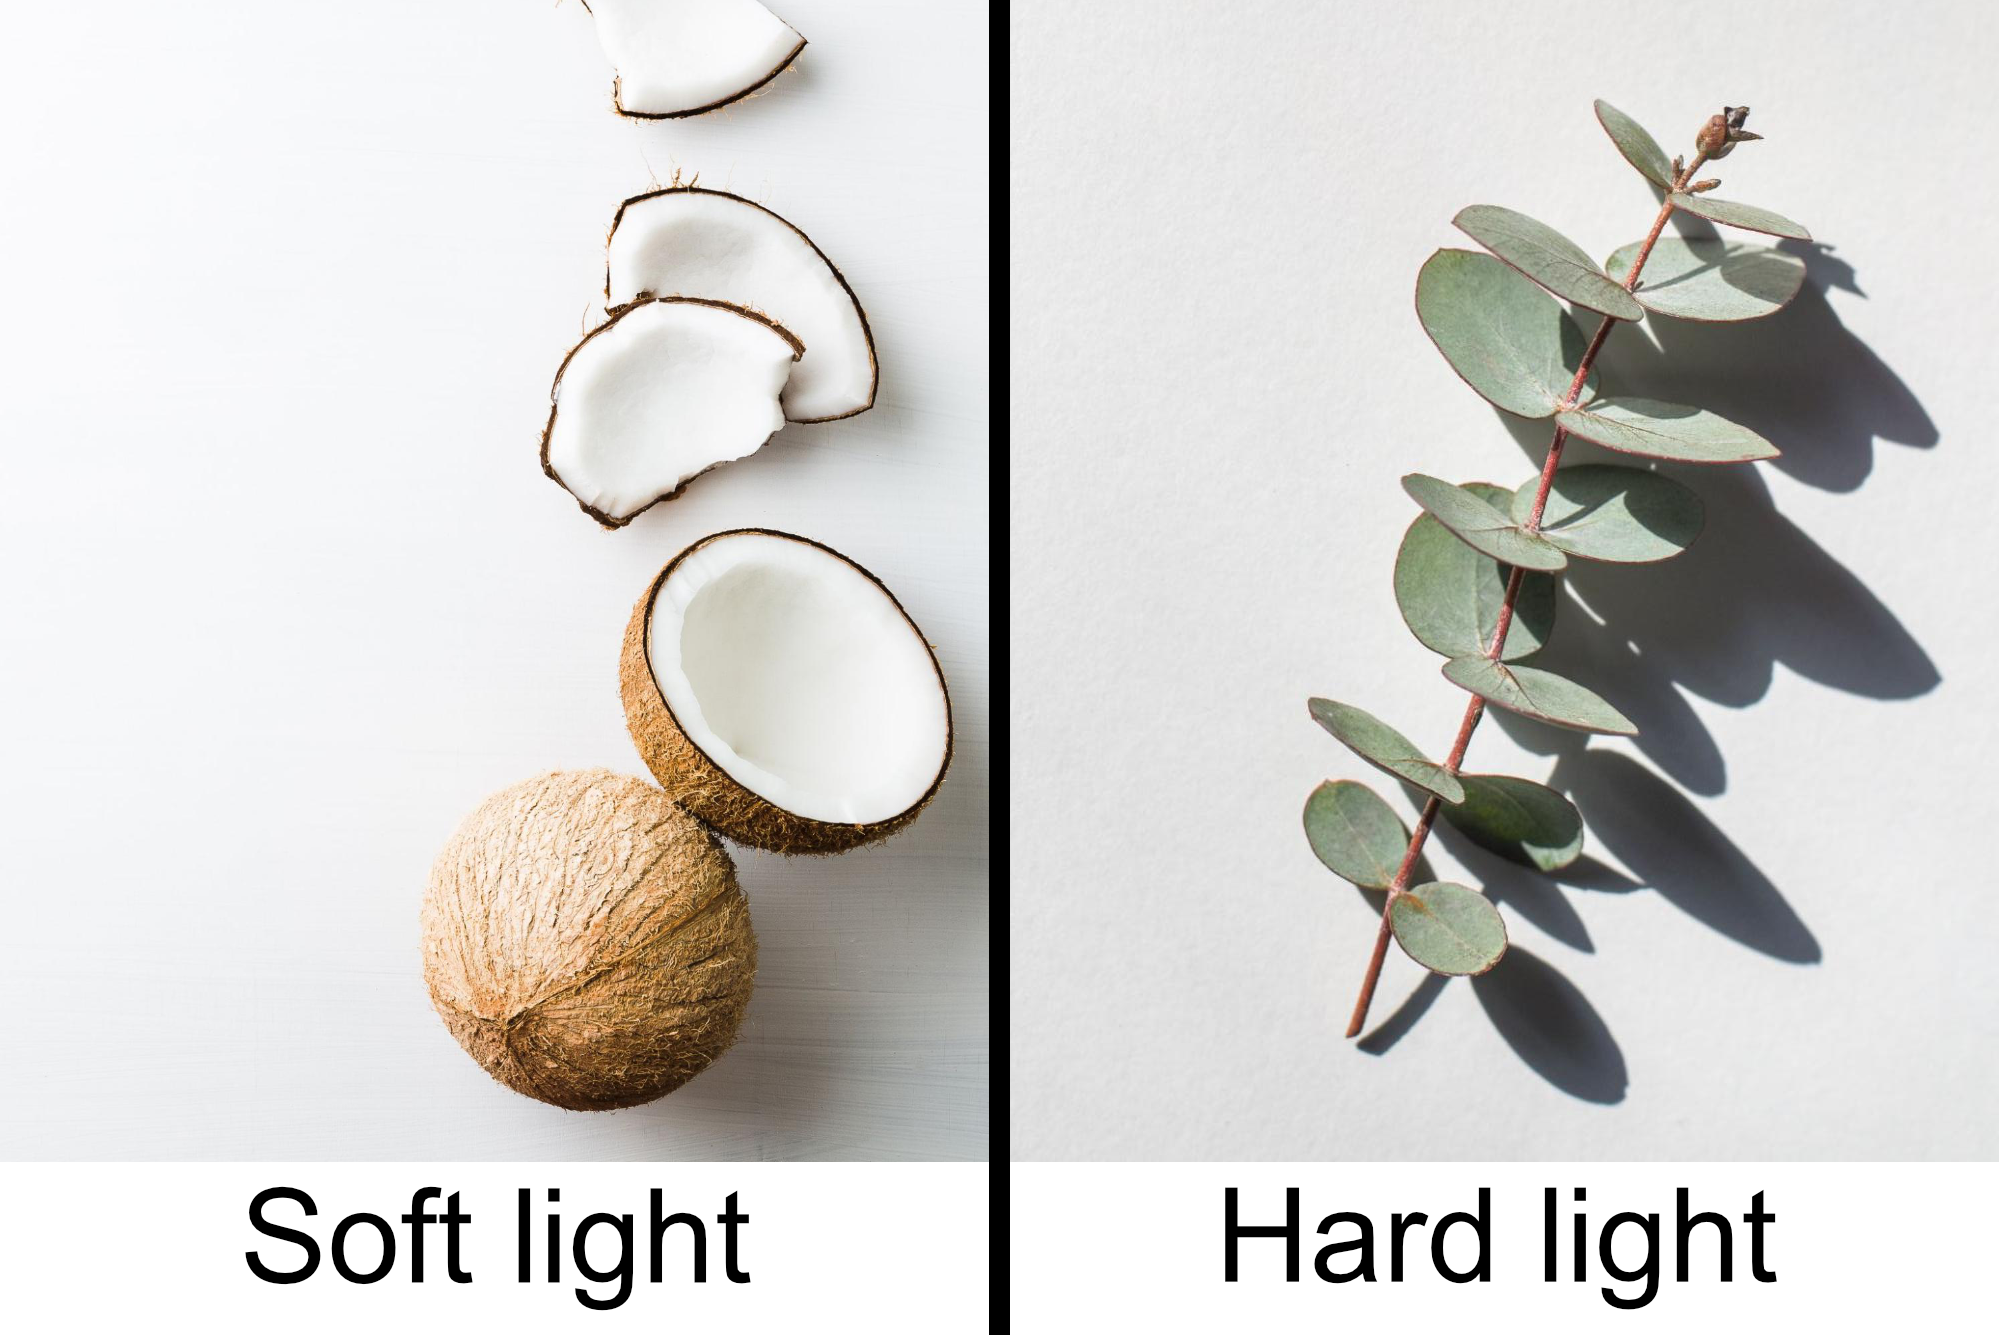 Side-by-side images of soft light (left) and hard light (right)